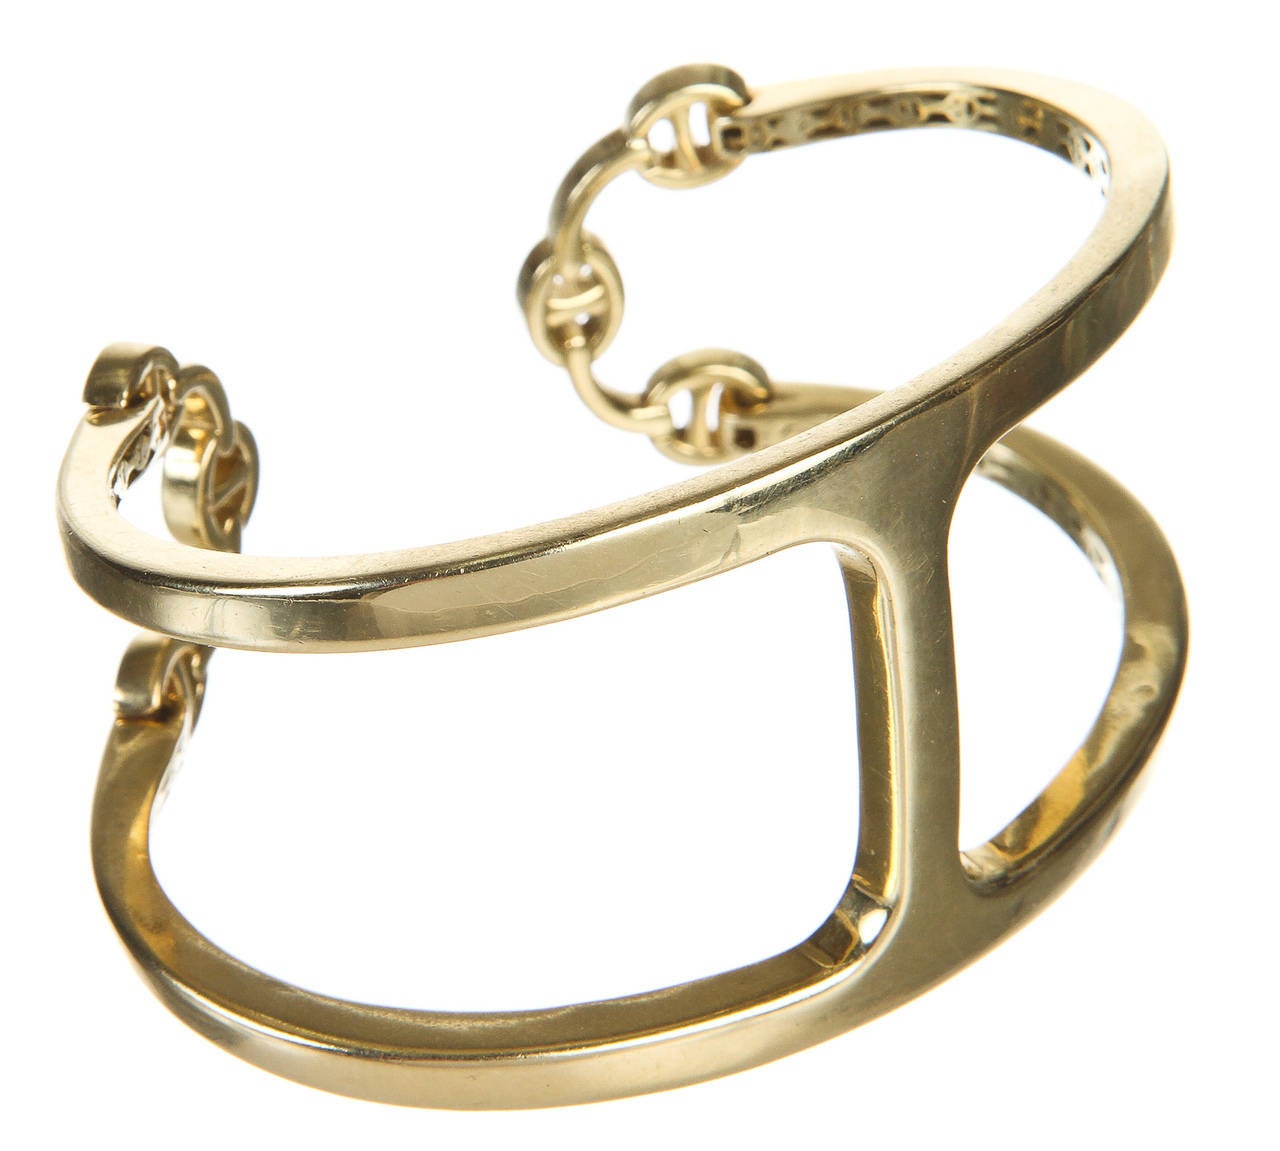 Featured here at Onquestyle is this stunning bracelet from Hoorsenbuhs. This fabulous bracelet has been crafted from 18k gold and features a hinged opening. This bracelet is a must have!